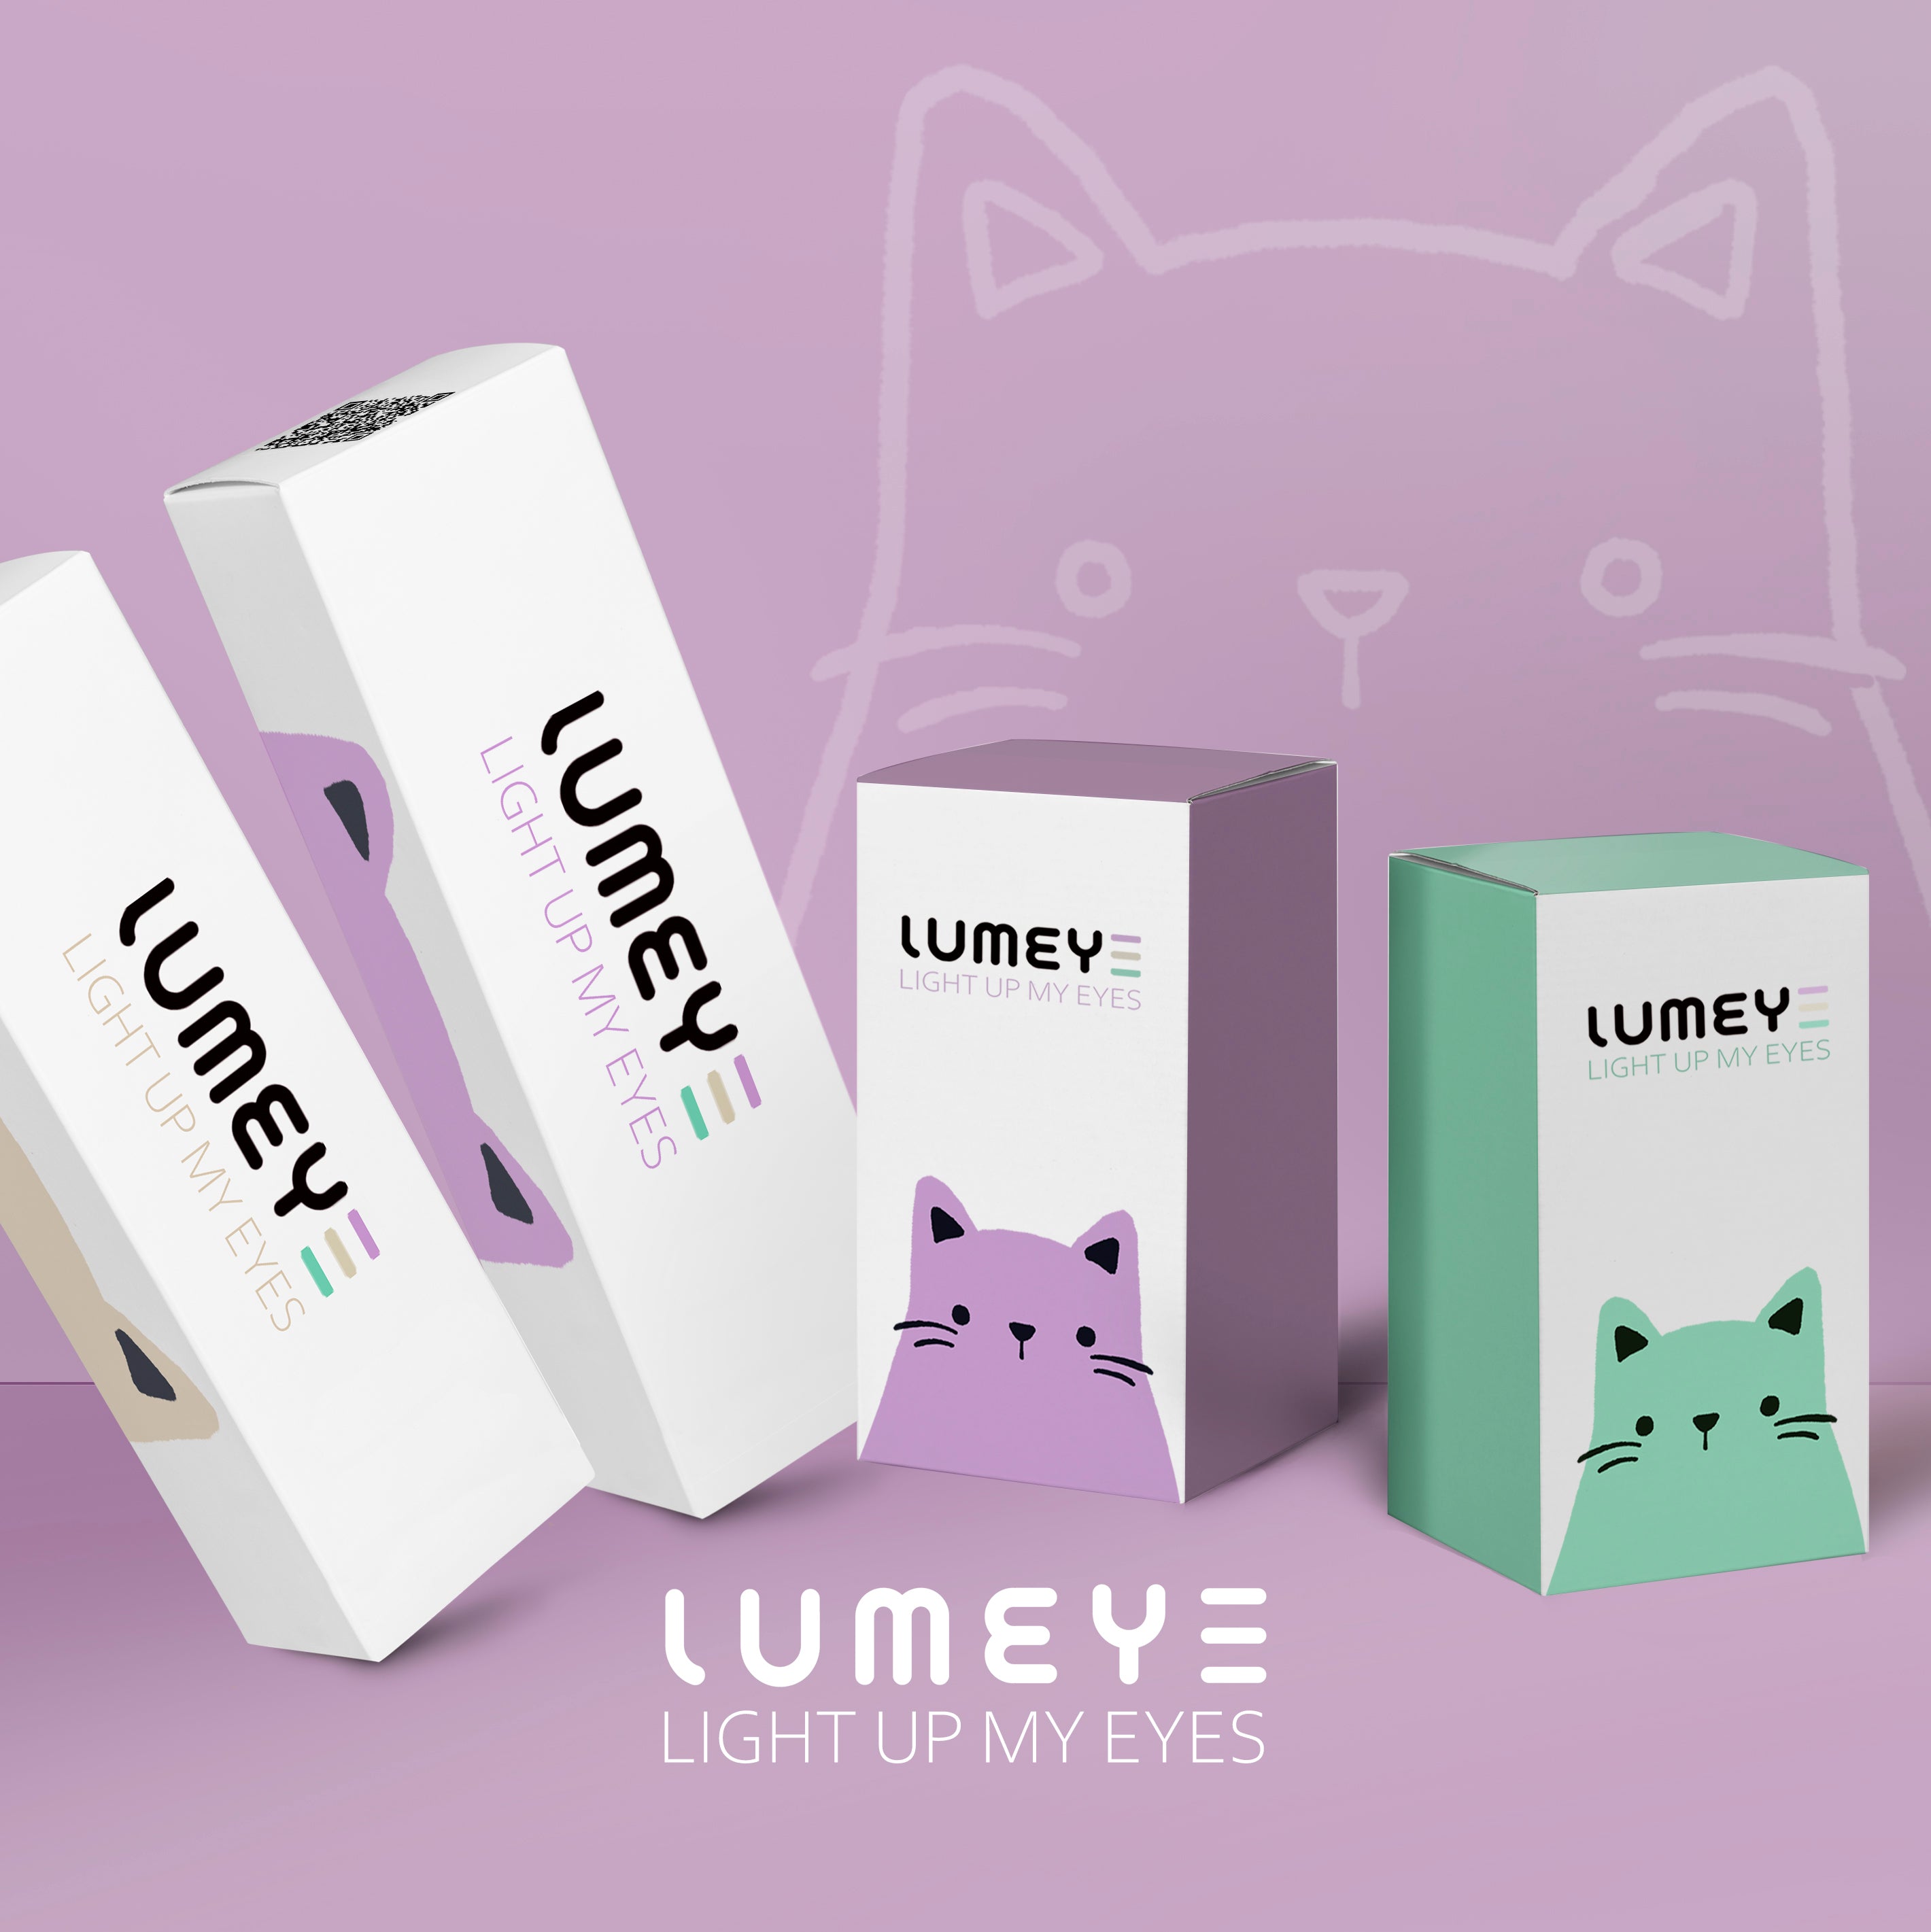 Best COLORED CONTACTS - LUMEYE Jelly Grape Purple Colored Contact Lenses - LUMEYE